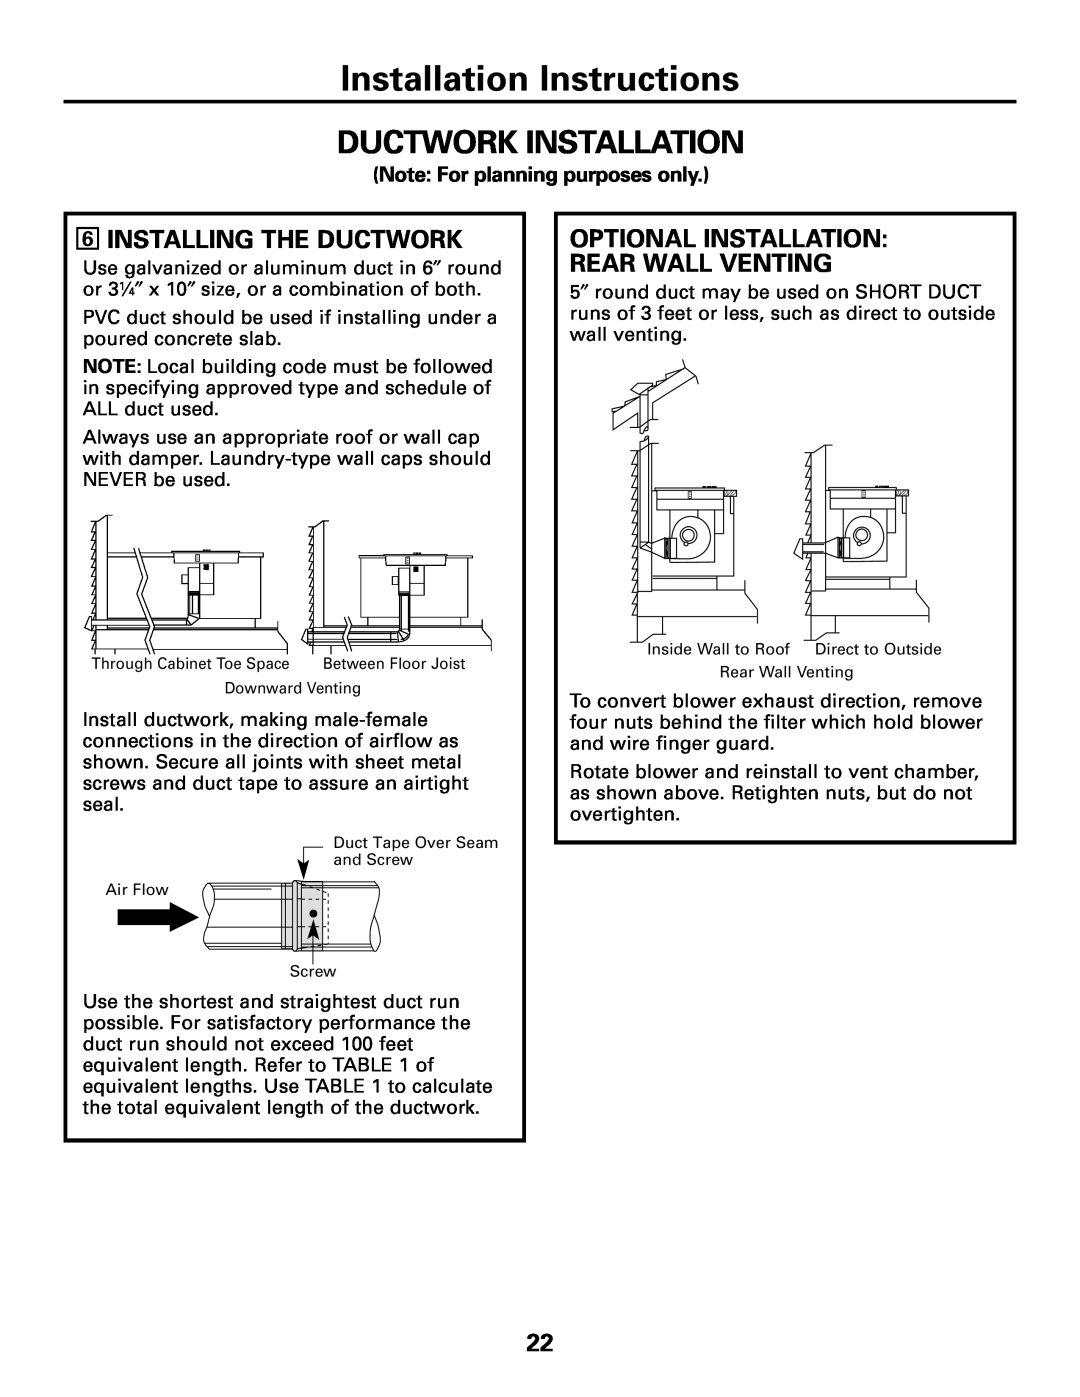 GE JGP989 Ductwork Installation, Installation Instructions, 6INSTALLING THE DUCTWORK, Note For planning purposes only 